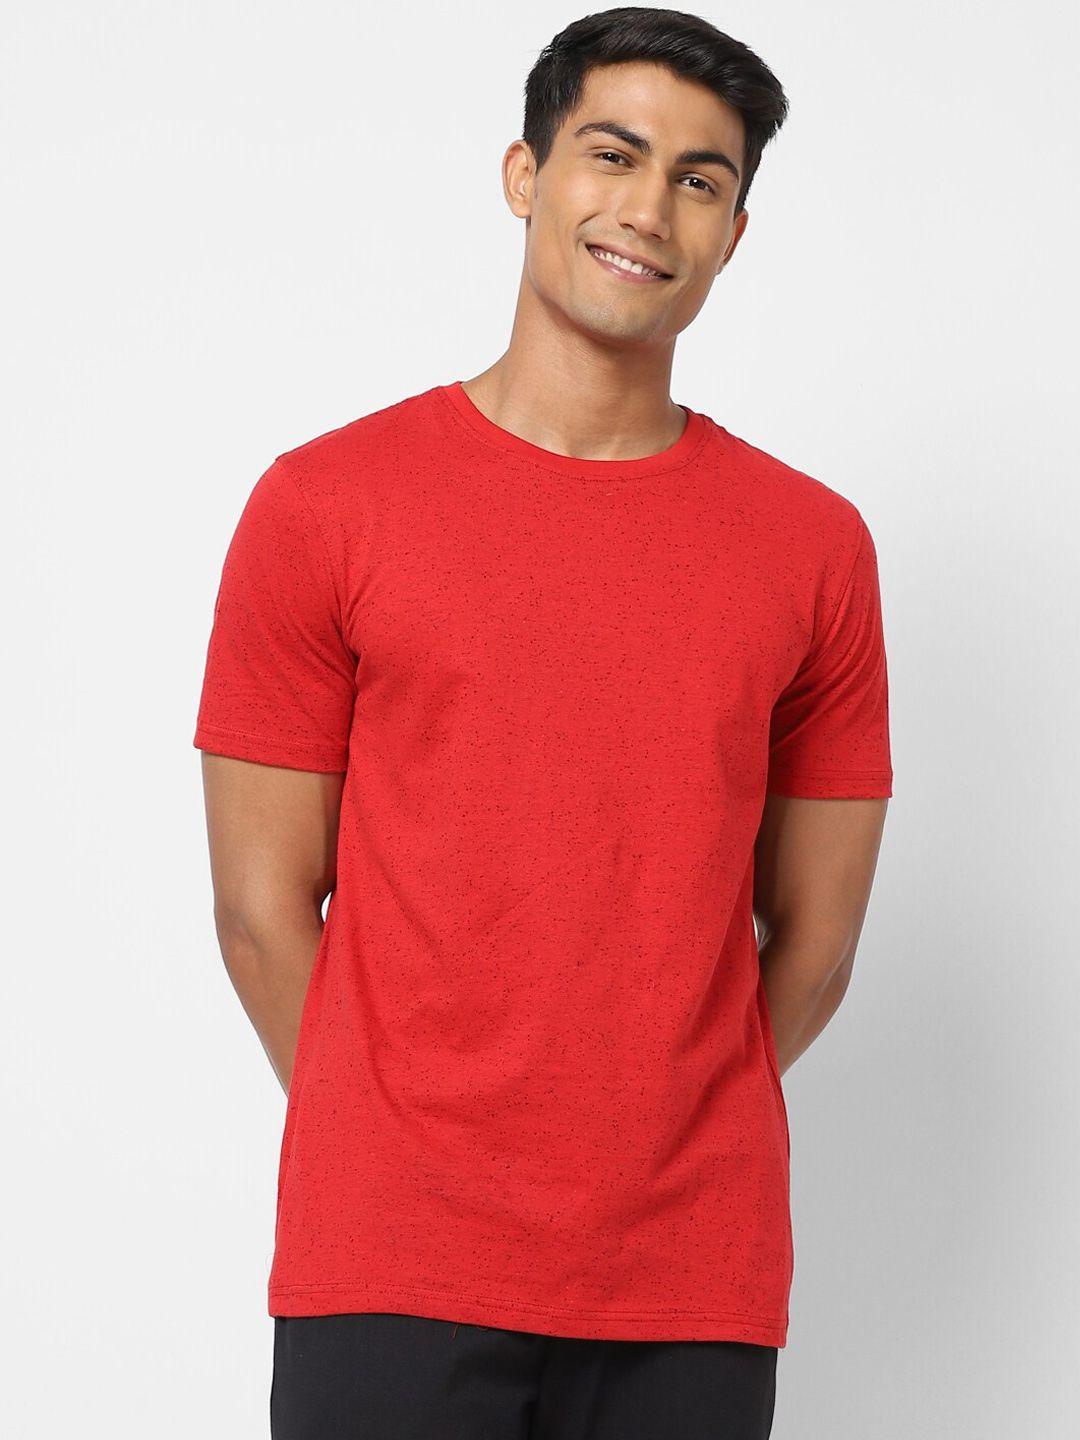 ajile-by-pantaloons-men-red-solid-lounge-t-shirt